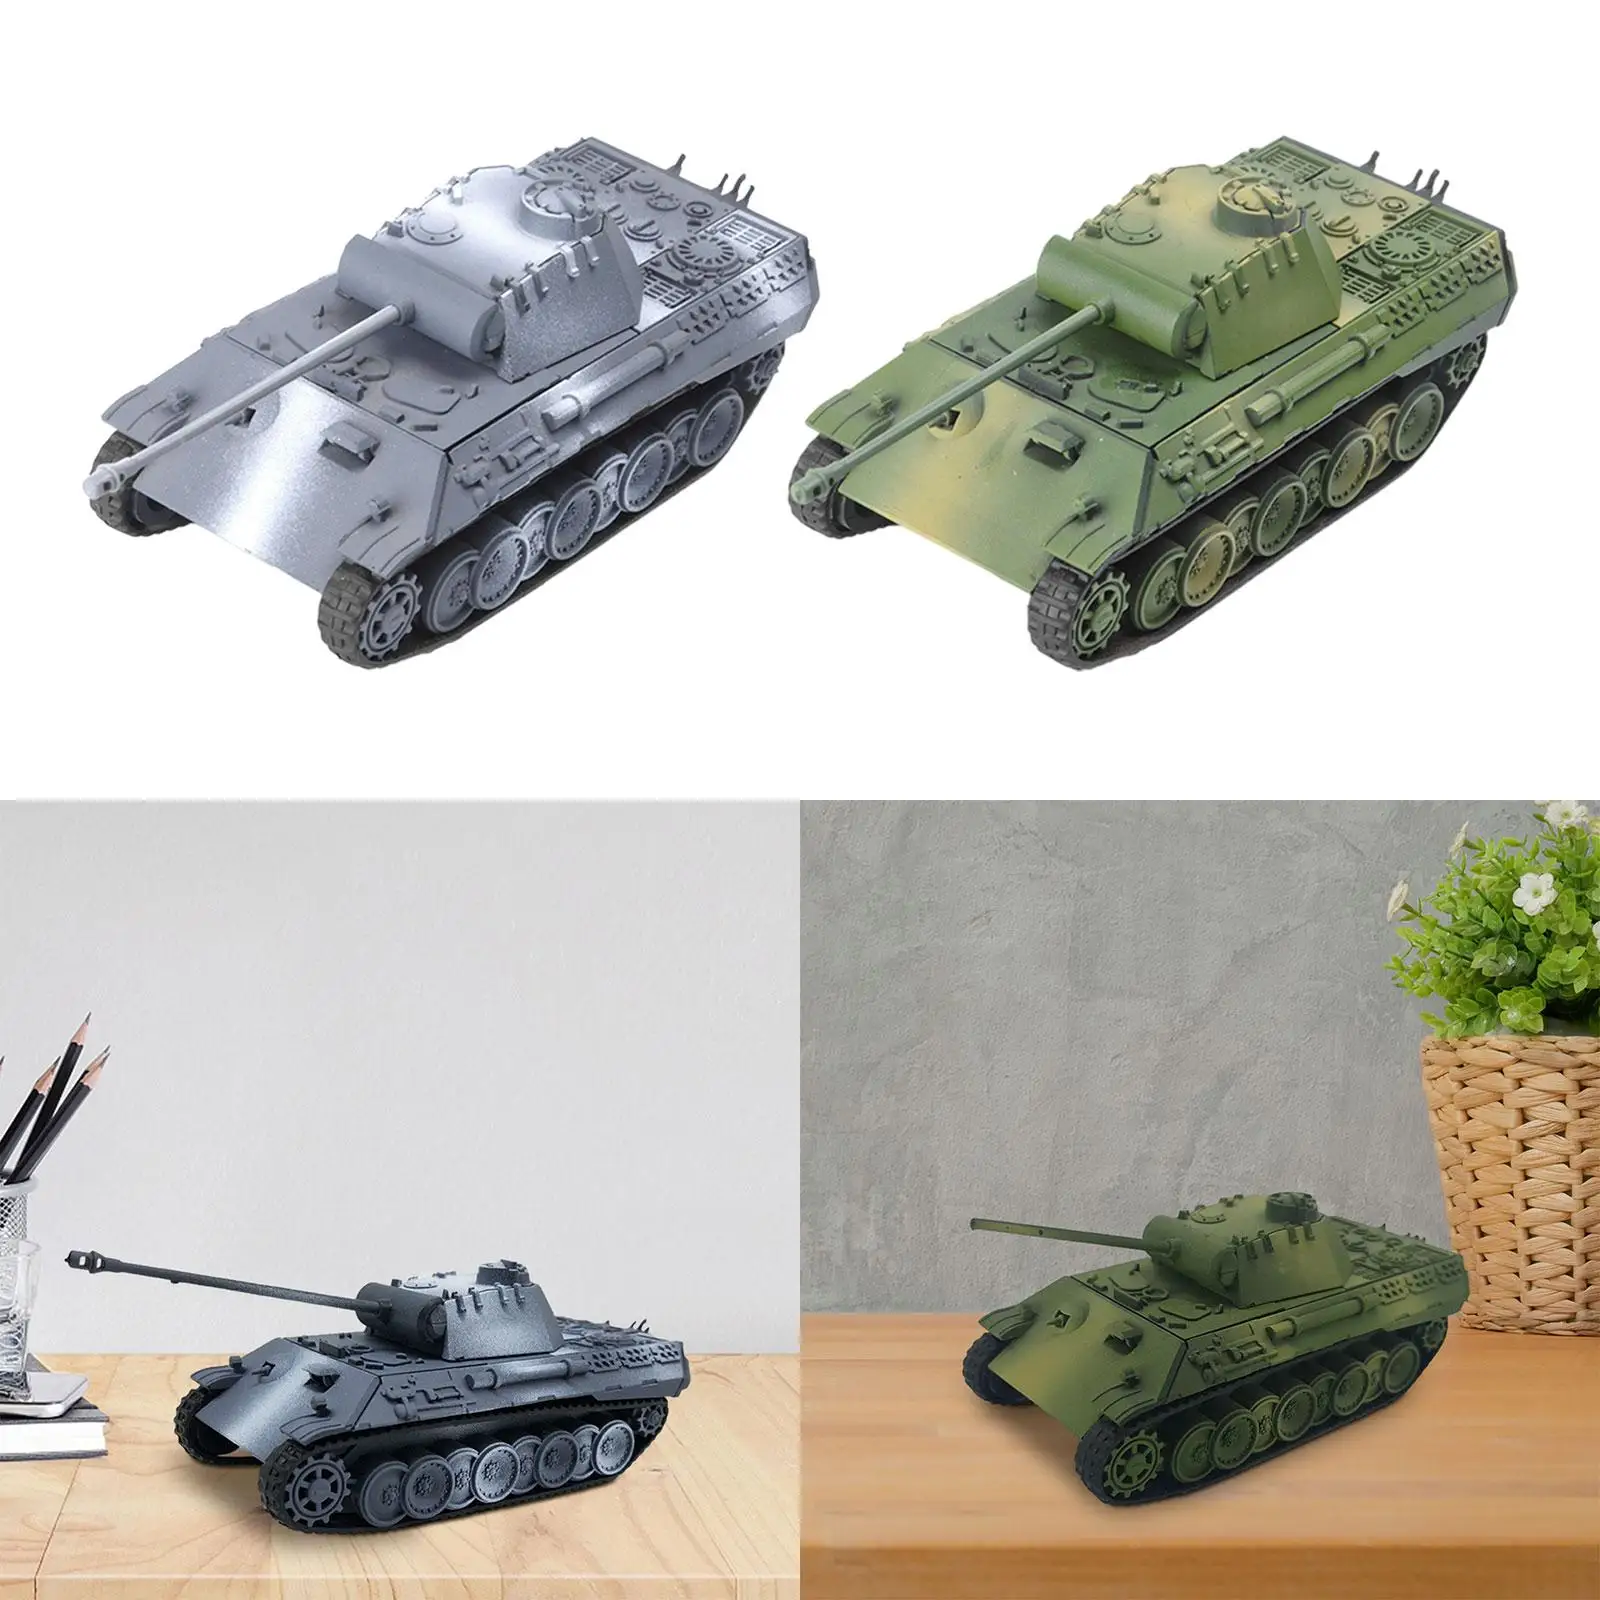 1:72 Scale Tank Model Kits DIY Assemble Table Scene Battle Tank Toy Collectible for Girls Boys Children Birthday Gift